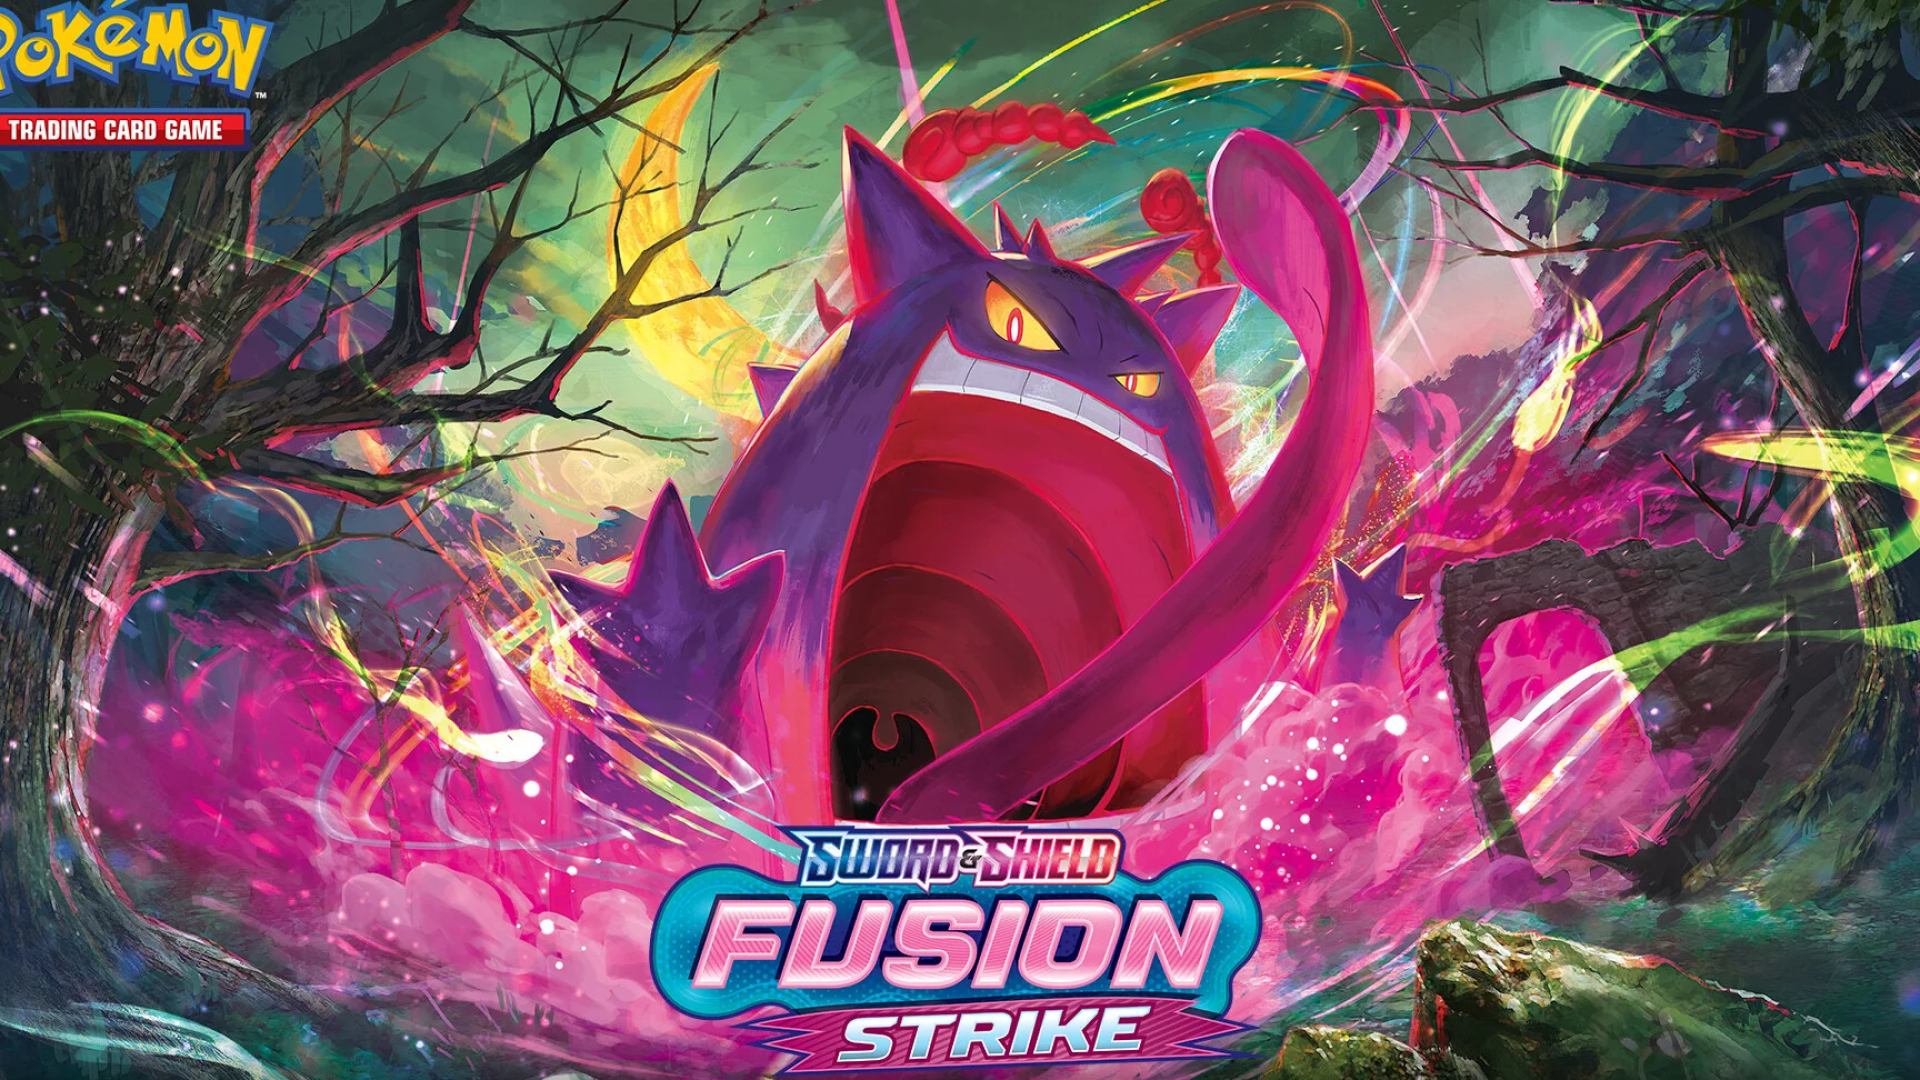 1920x1080 Download Fusion Strike Wallpapers | PokeGuardian | We Bring You the Latest Pok&Atilde;&copy;mon TCG News Every Day